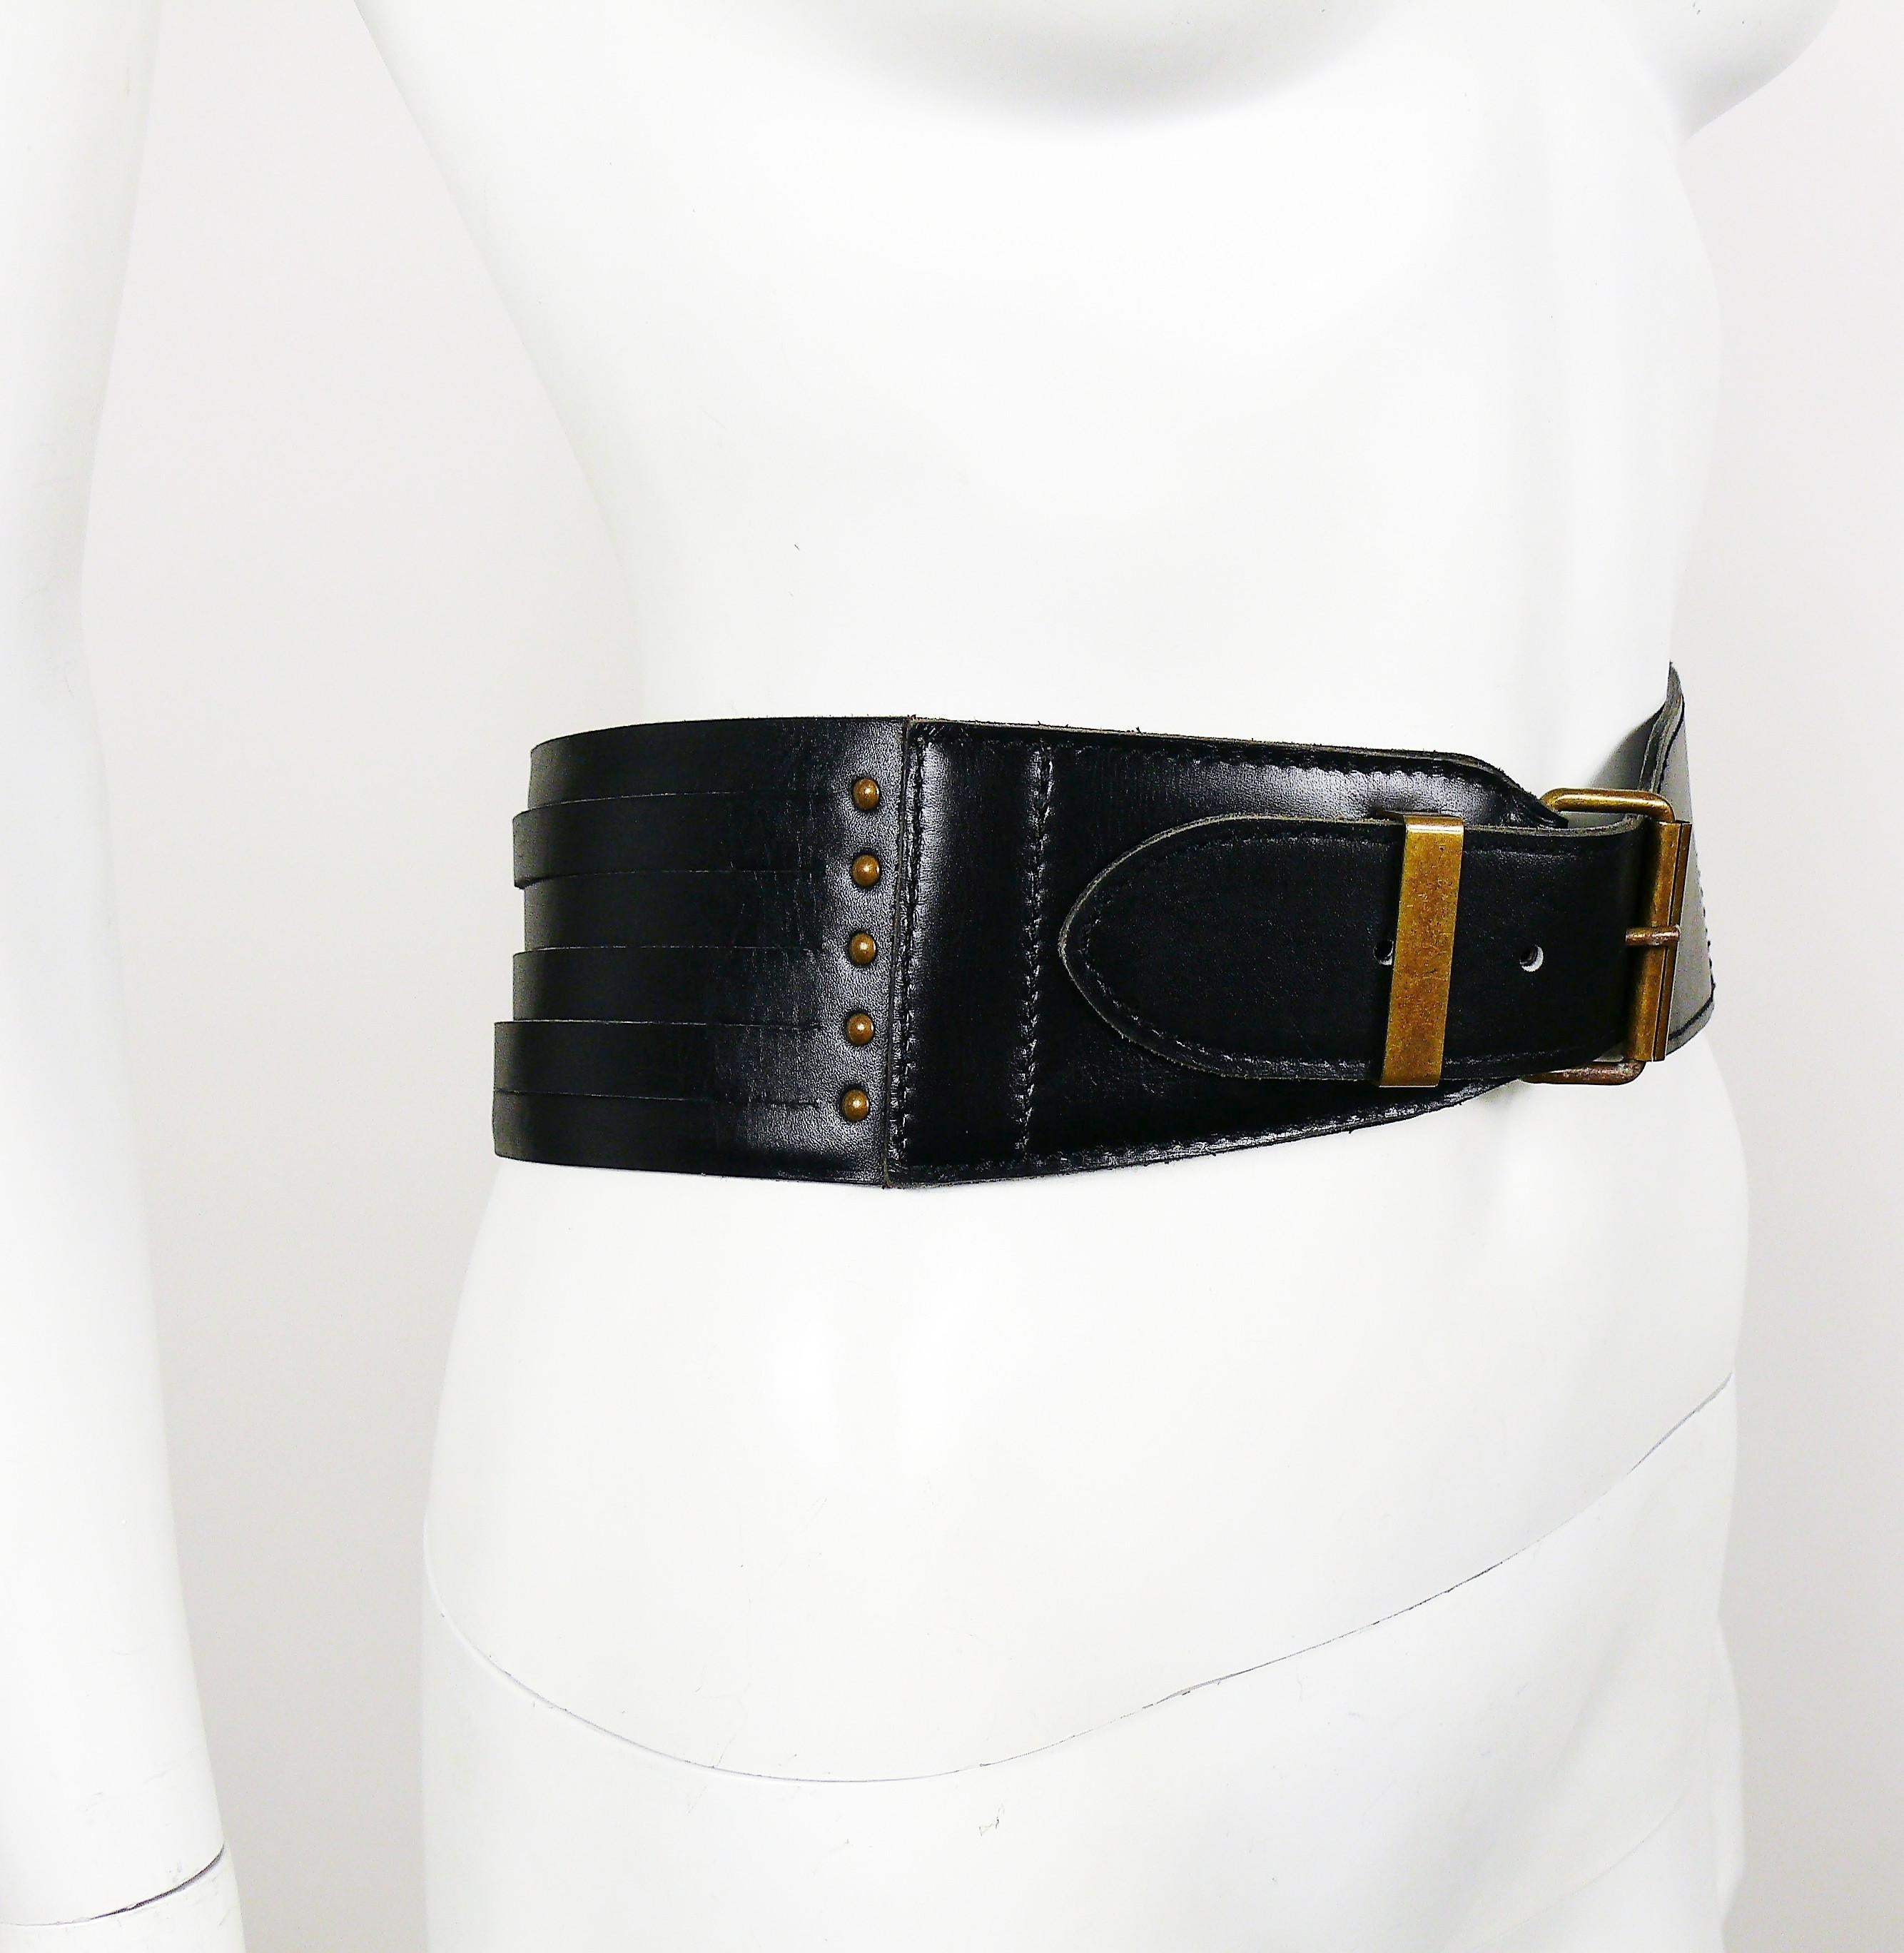 ALAIA vintage black high-waist leather belt featuring a back corset style design with several strips lacing and stud details on the sides.

Bronze toned hardware.

Marked ALAIA PARIS.
Made in France.

Indicated size : 75.
Please refer to